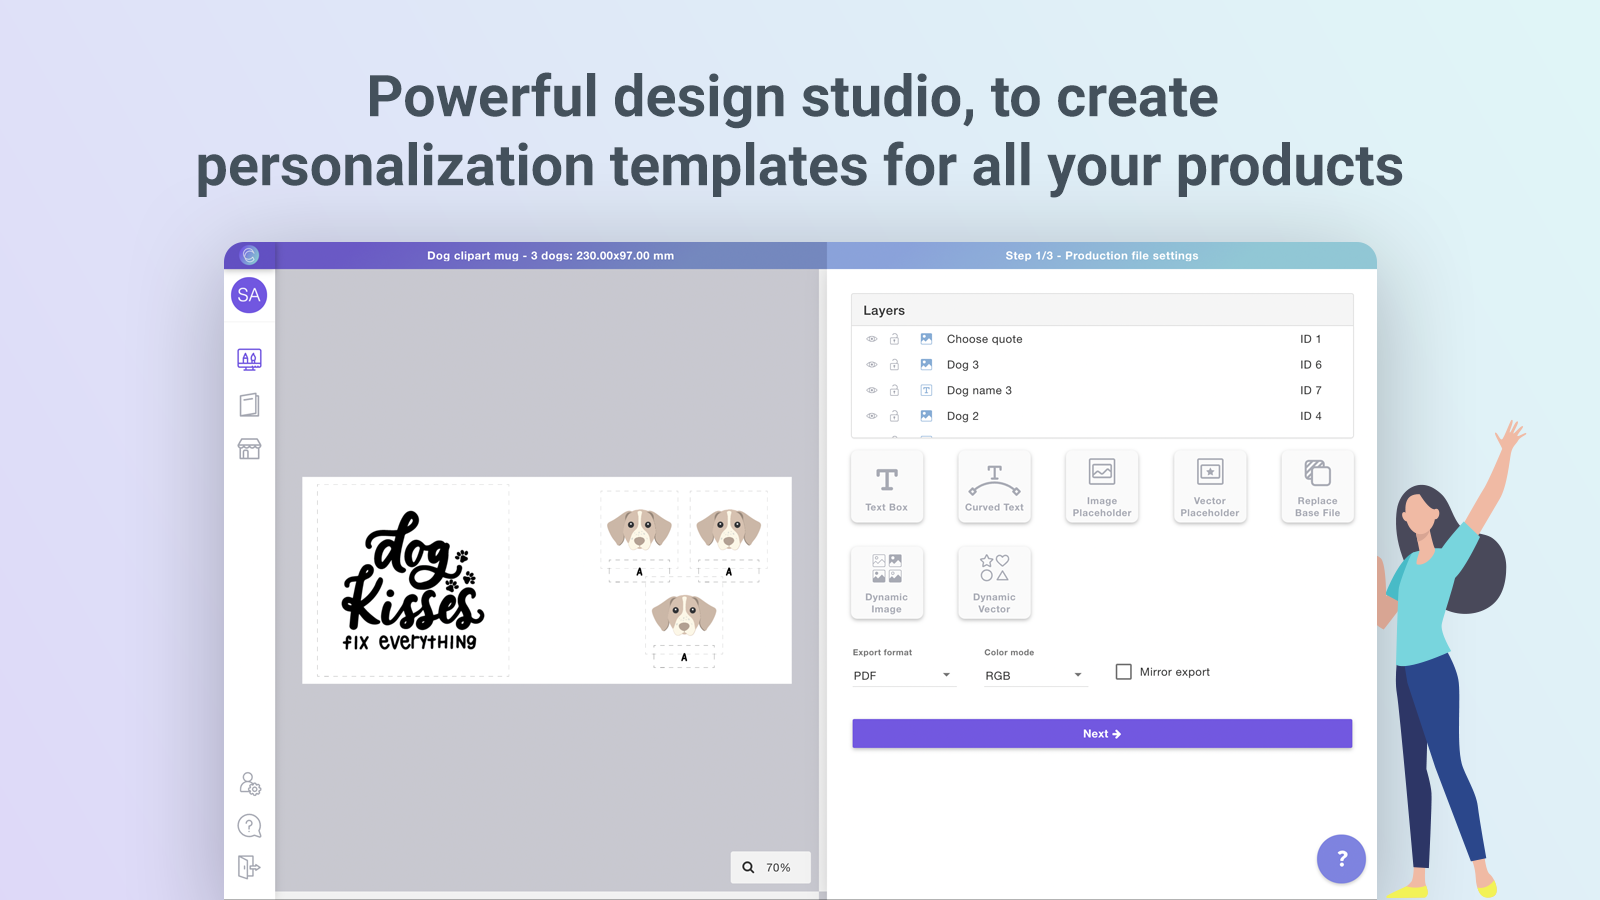 Powerful design studio, to create personalization templates for all your products.